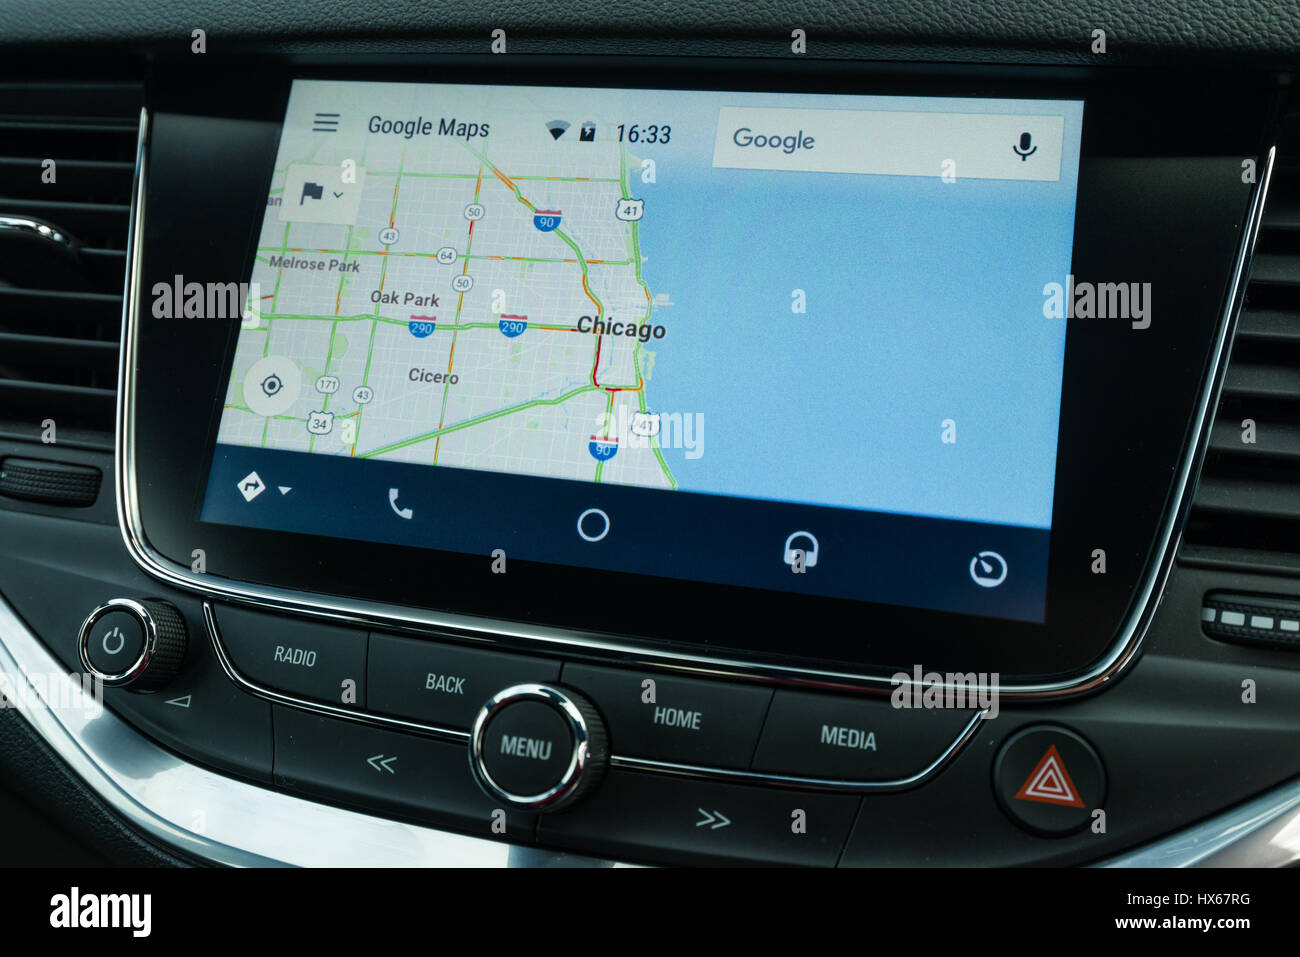 Android Auto Maps Navigation Car Vehicle Interface Showing Chicago Stock Photo